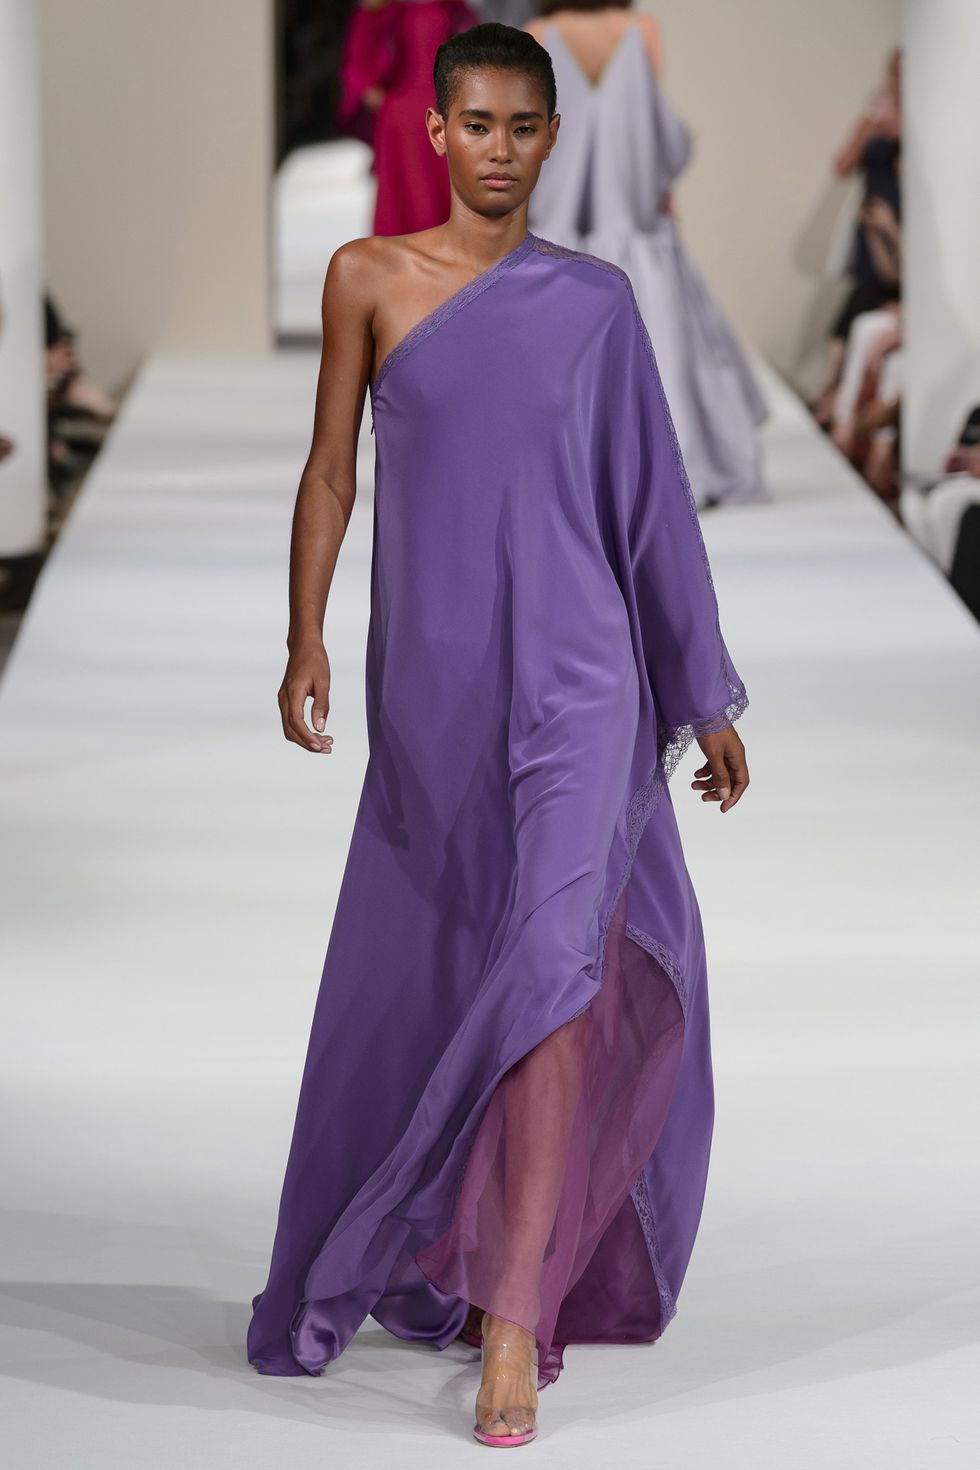 couture-week-alexis-mabille-01